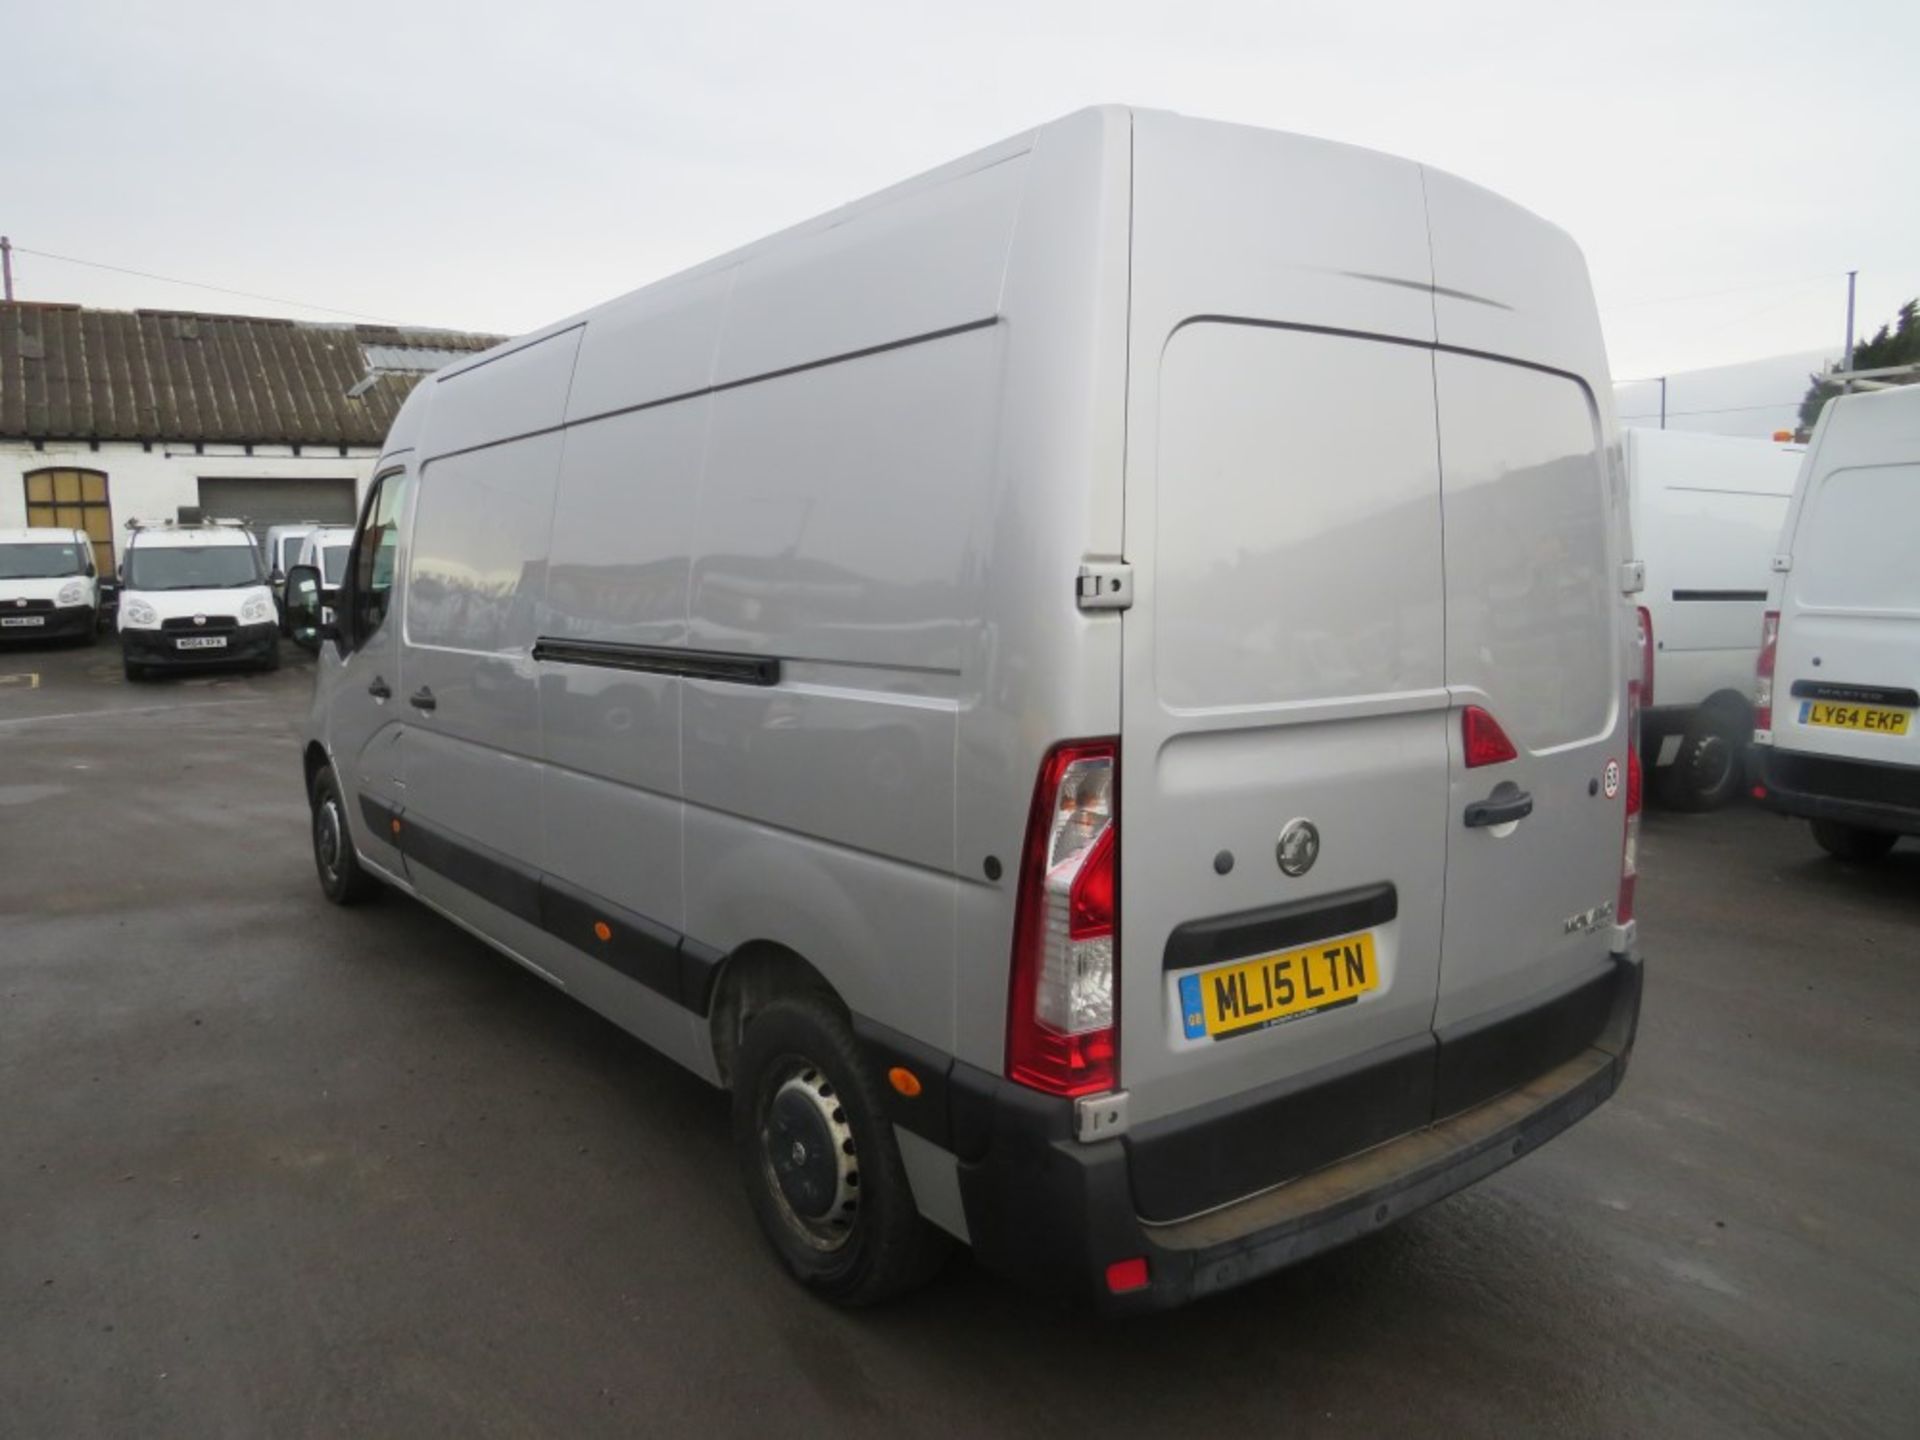 15 reg VAUXHALL MOVANO F3500 CDTI, 1ST REG 05/15, TEST 05/20, 106558M WARRANTED, V5 HERE, 1 OWNER - Image 3 of 6